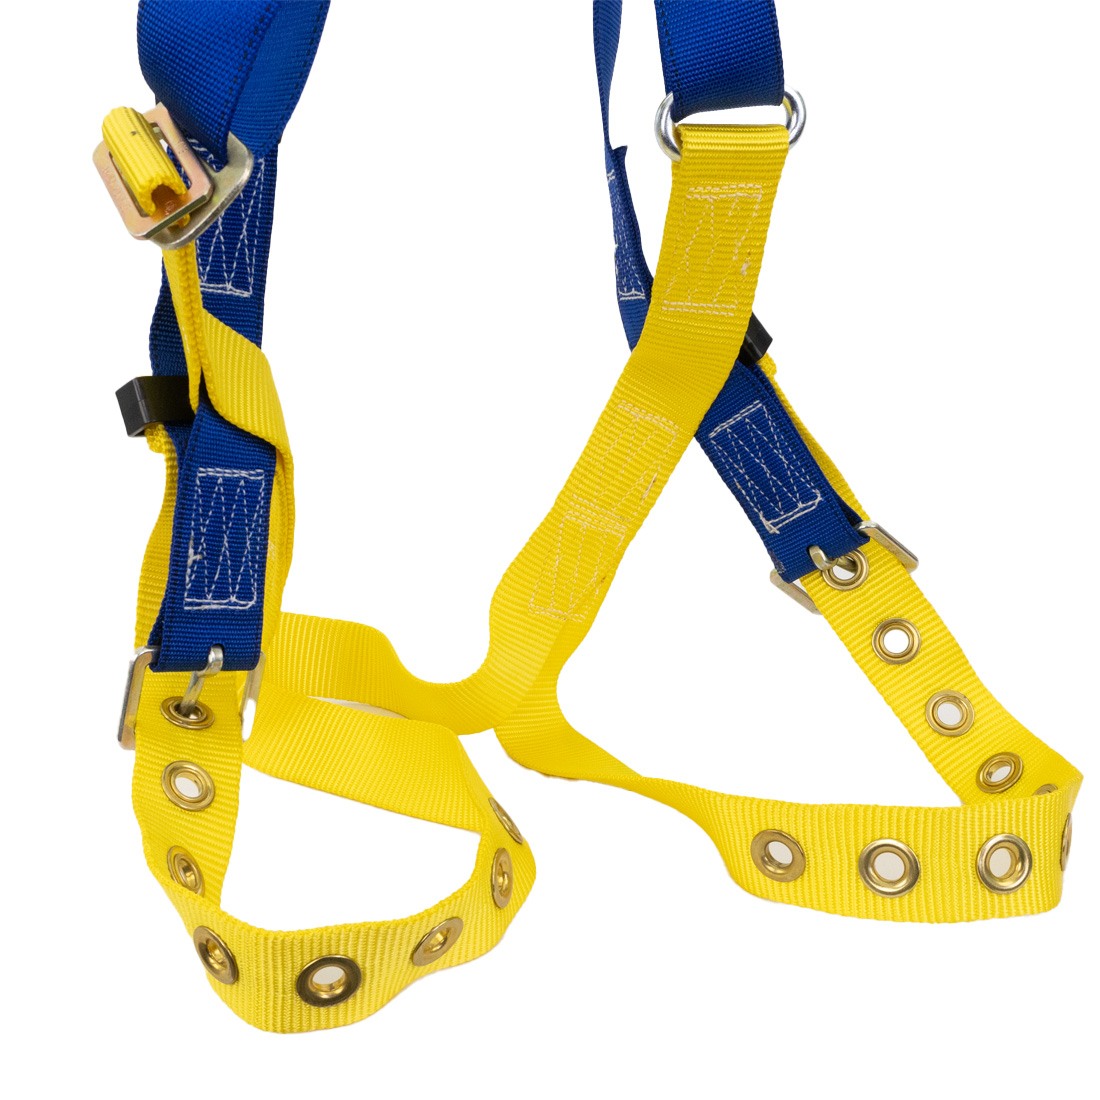 Gemtor Full Body Vest Universal Harness 833-2 - Tongue Buckles Bottom View